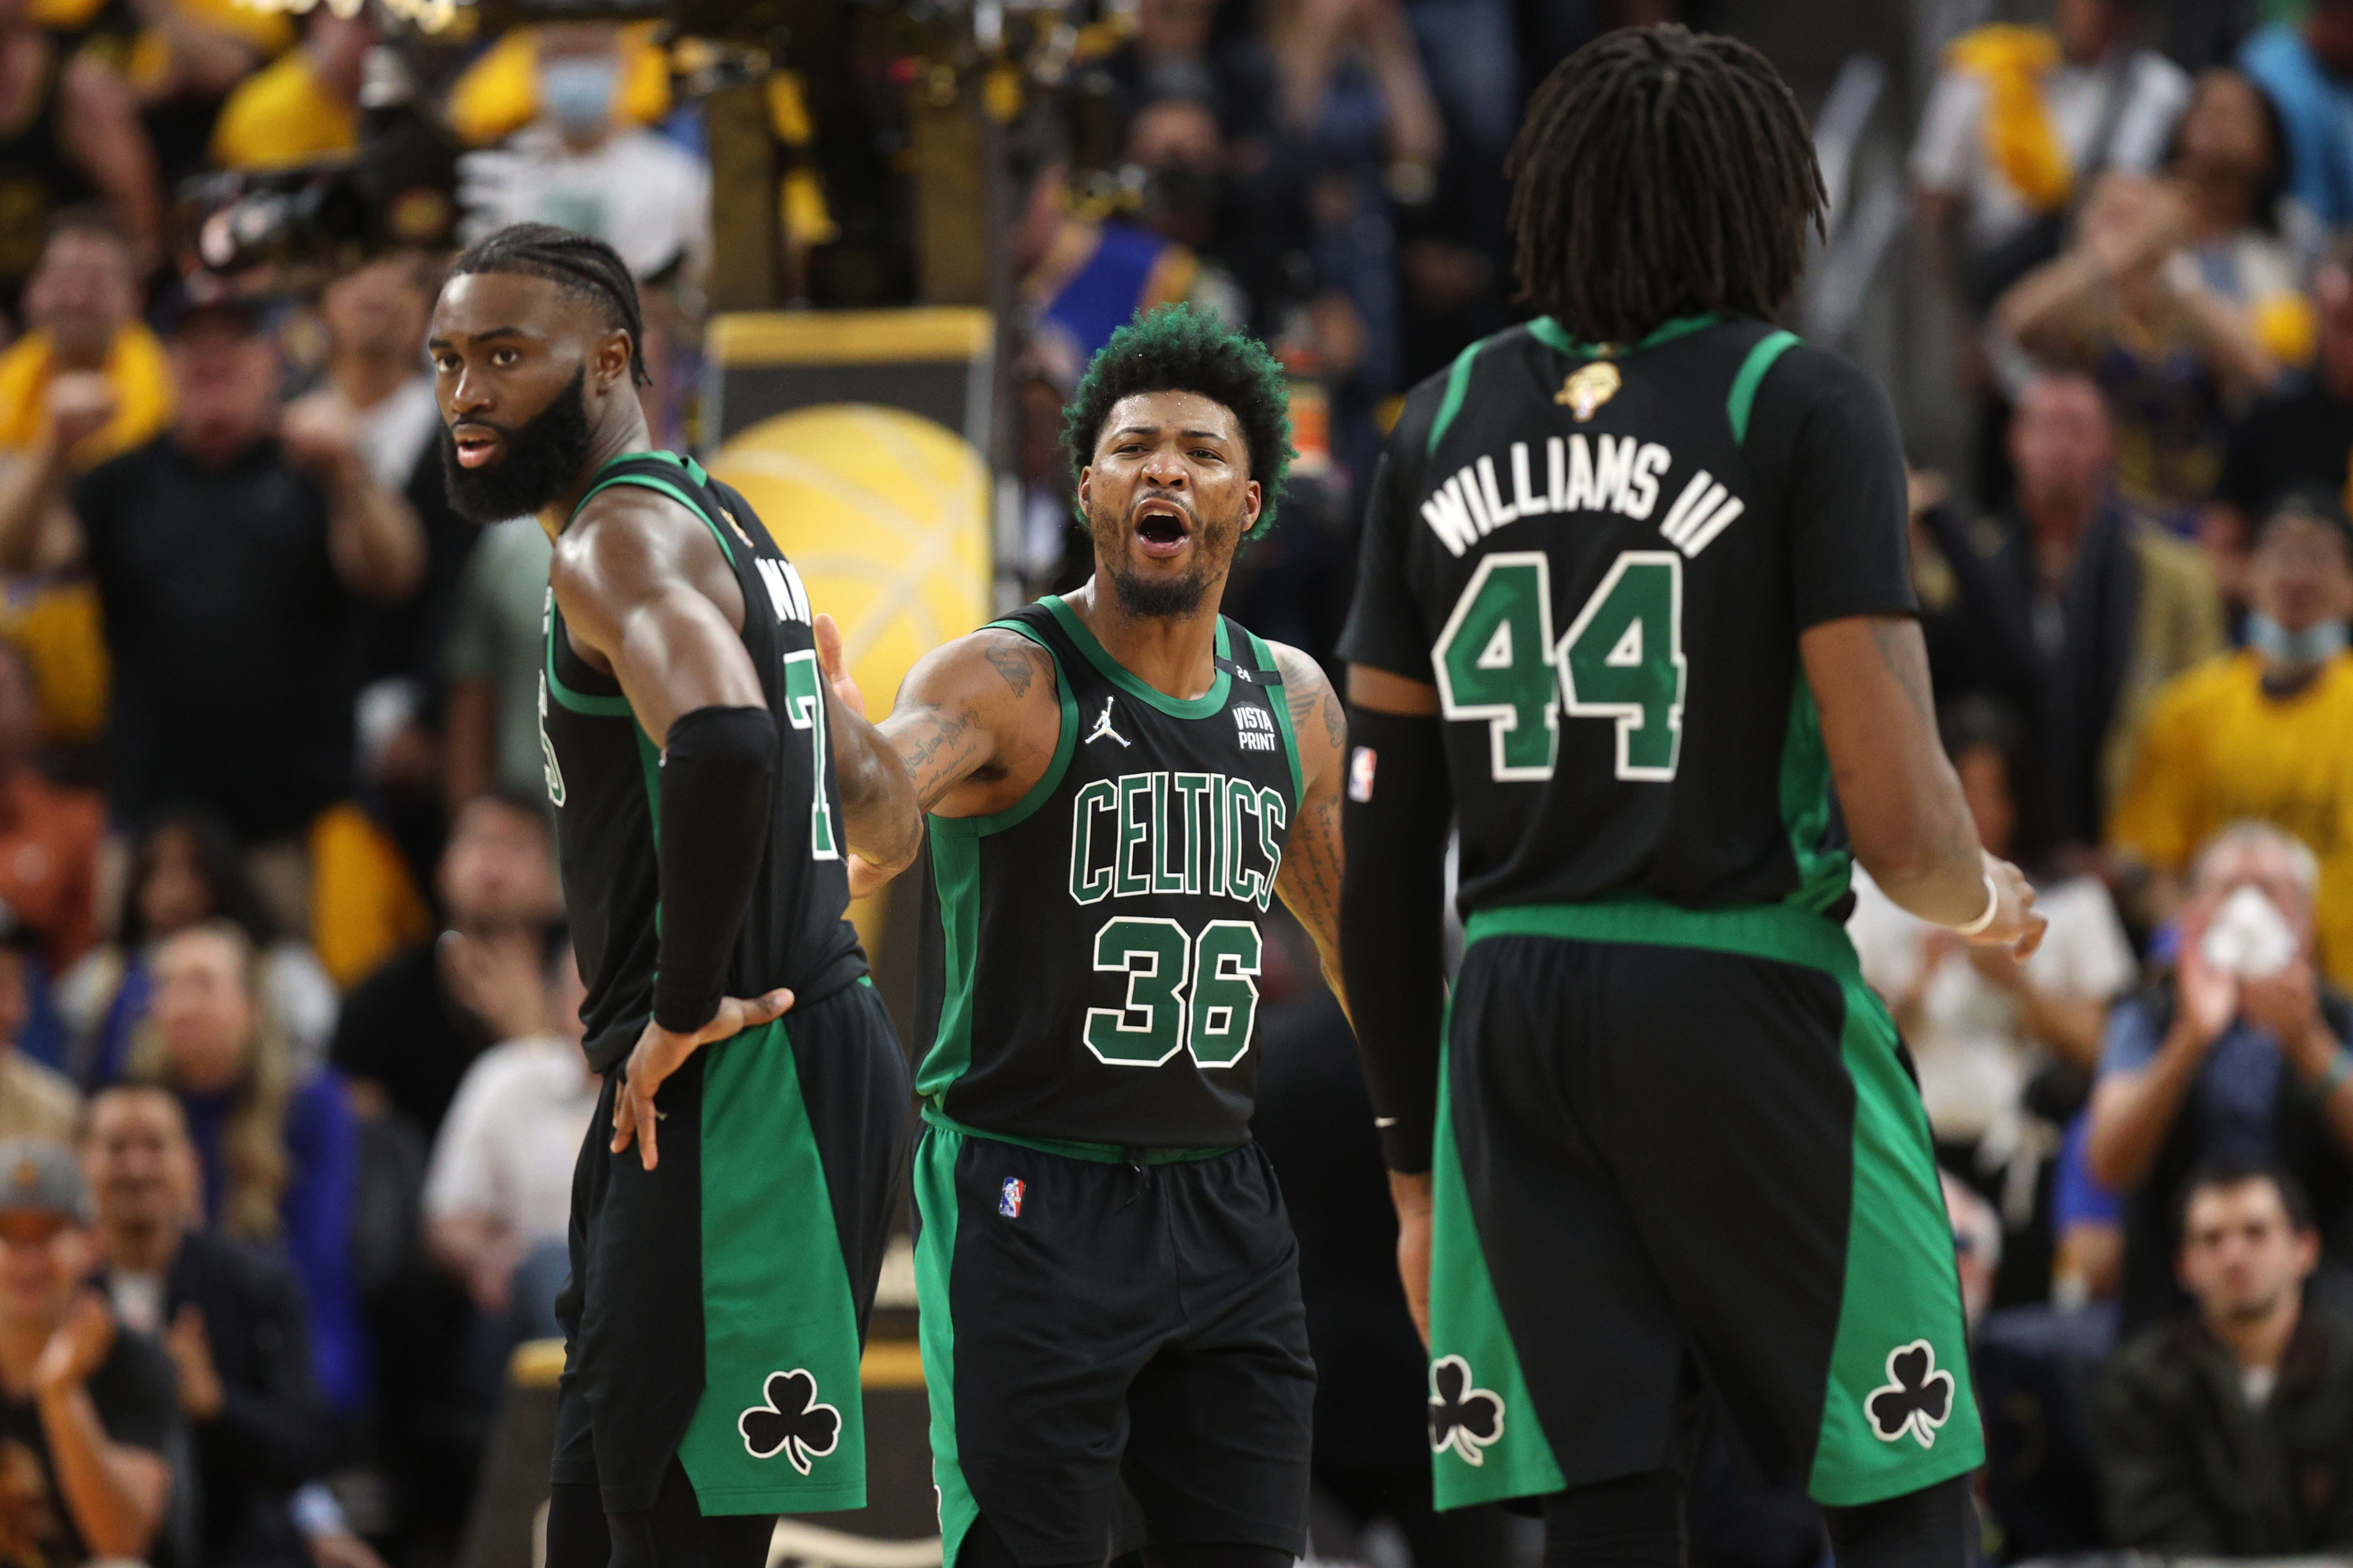 Celtics on 1-0 lead in NBA finals, rampant against Warriors in 4th